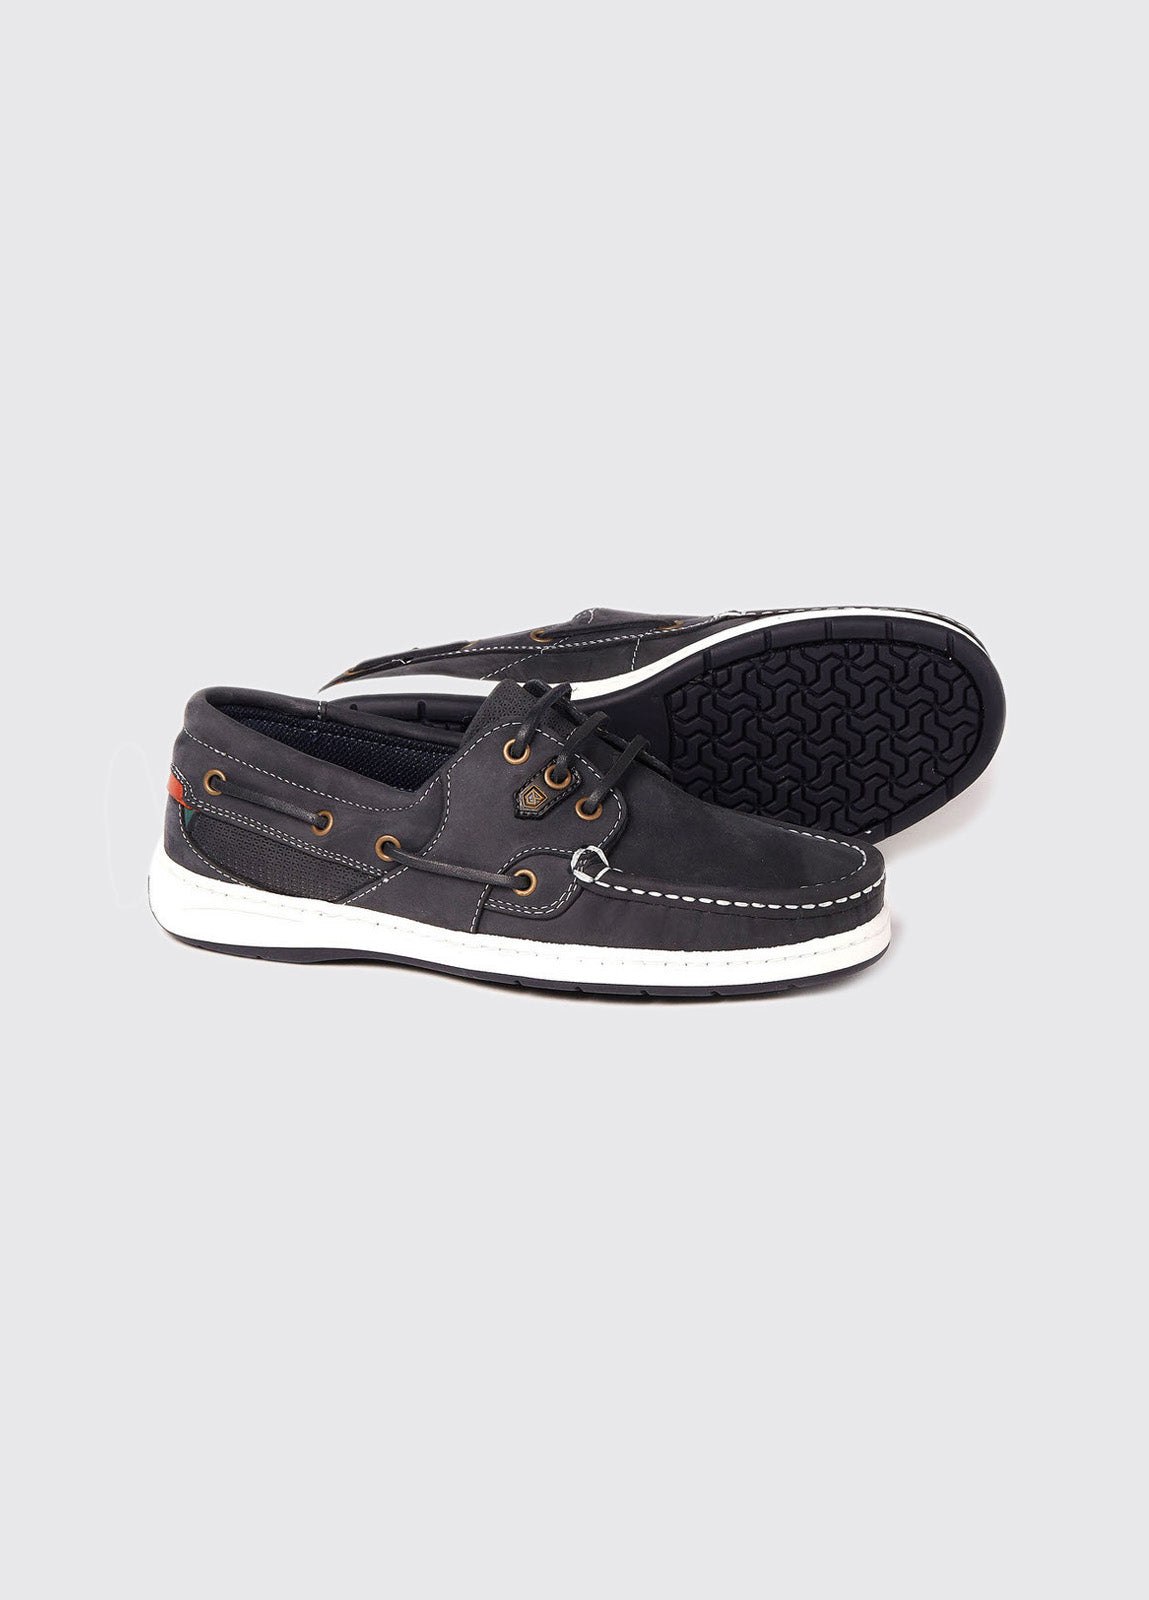 Auckland Loafer - Navy